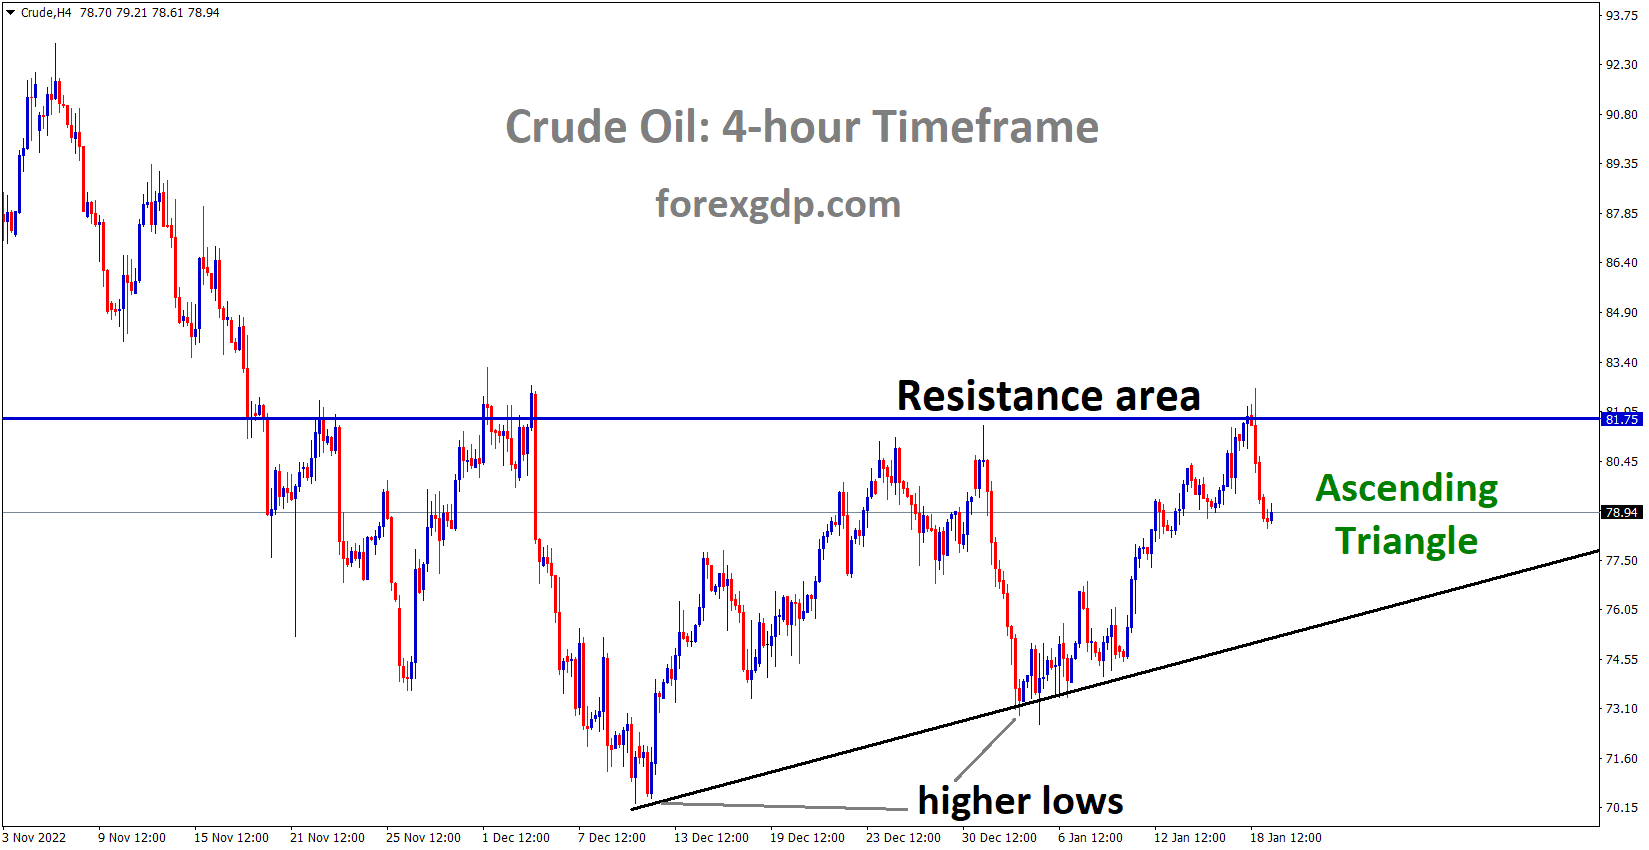 Crude Oil is moving in an Ascending triangle pattern and the market has fallen from the resistance area of the pattern